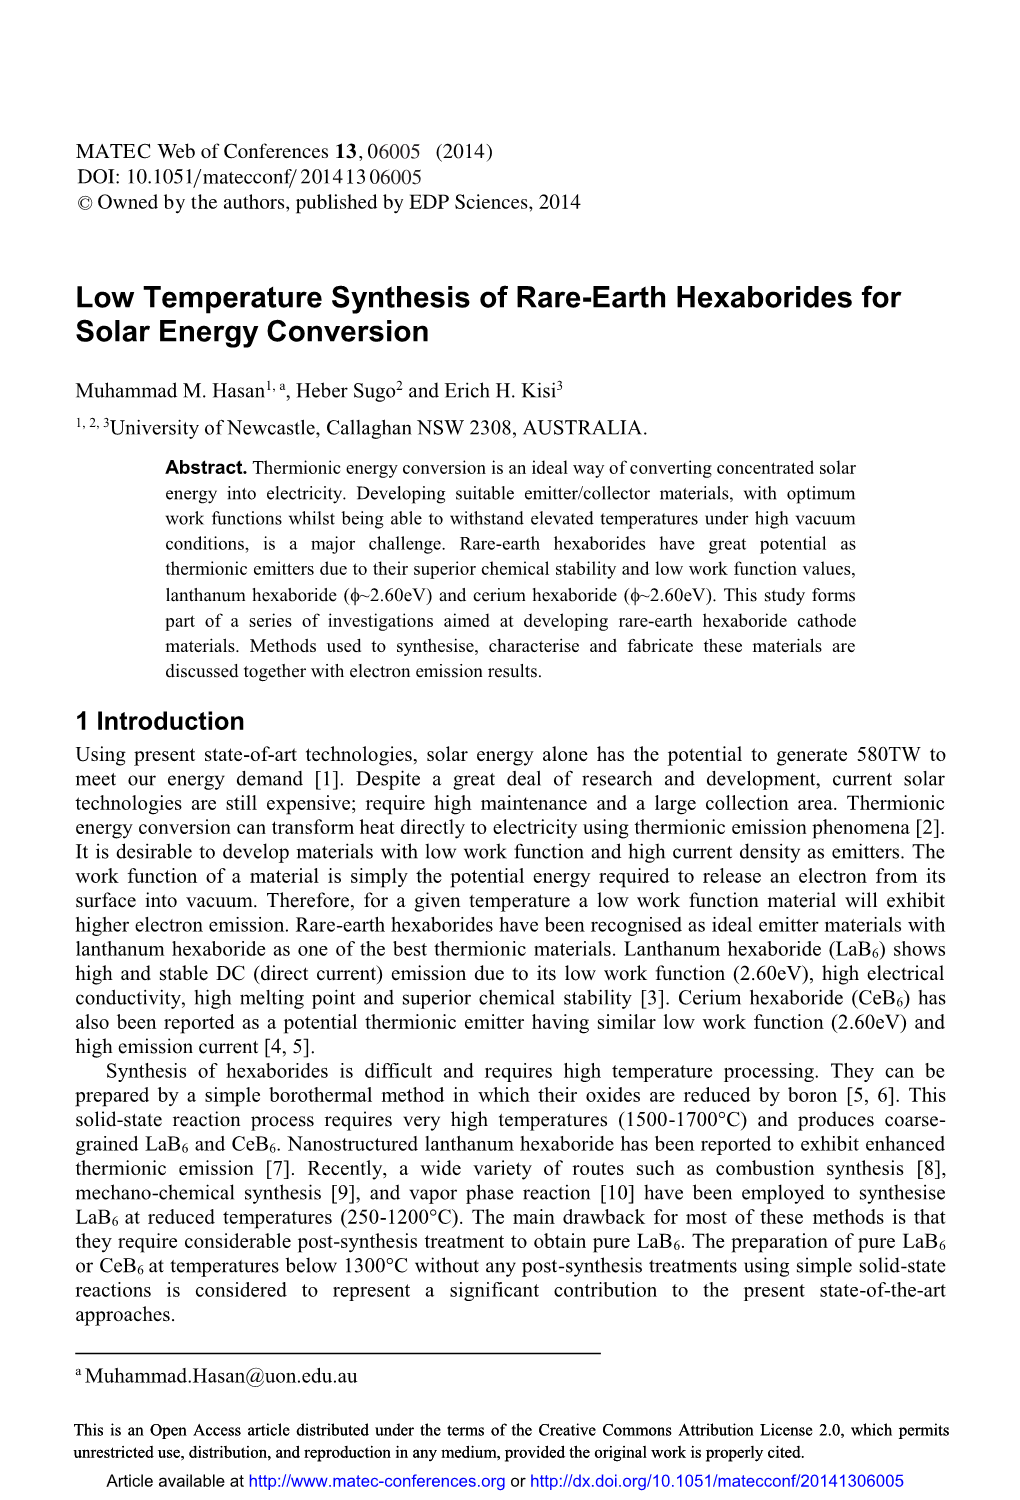 Low Temperature Synthesis of Rare-Earth Hexaborides for Solar Energy Conversion